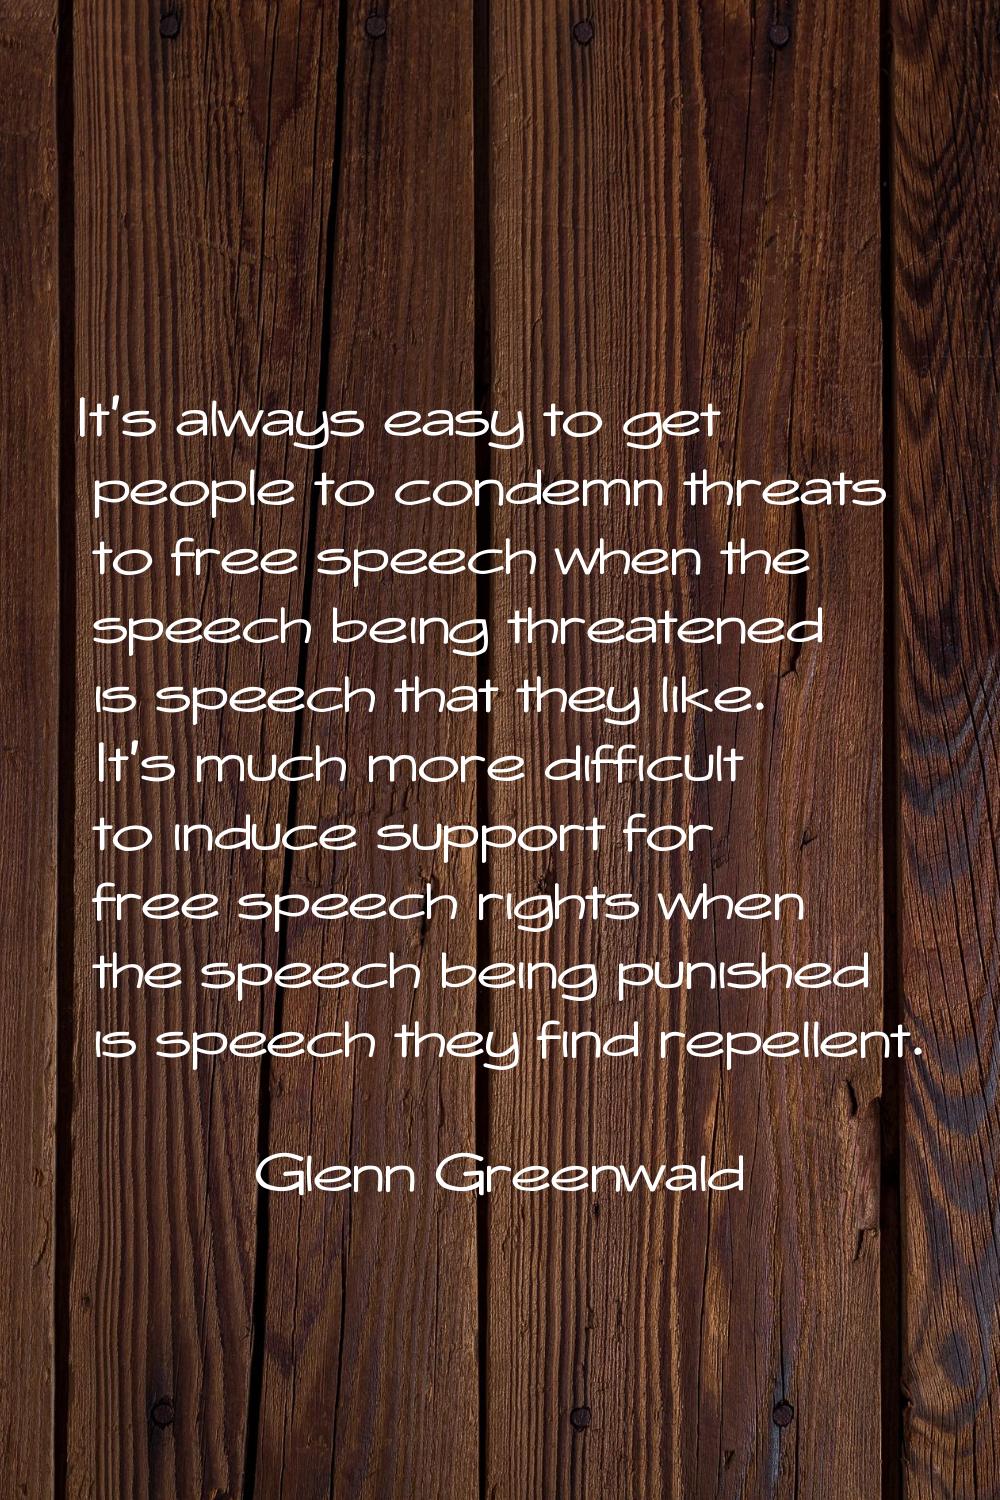 It's always easy to get people to condemn threats to free speech when the speech being threatened i